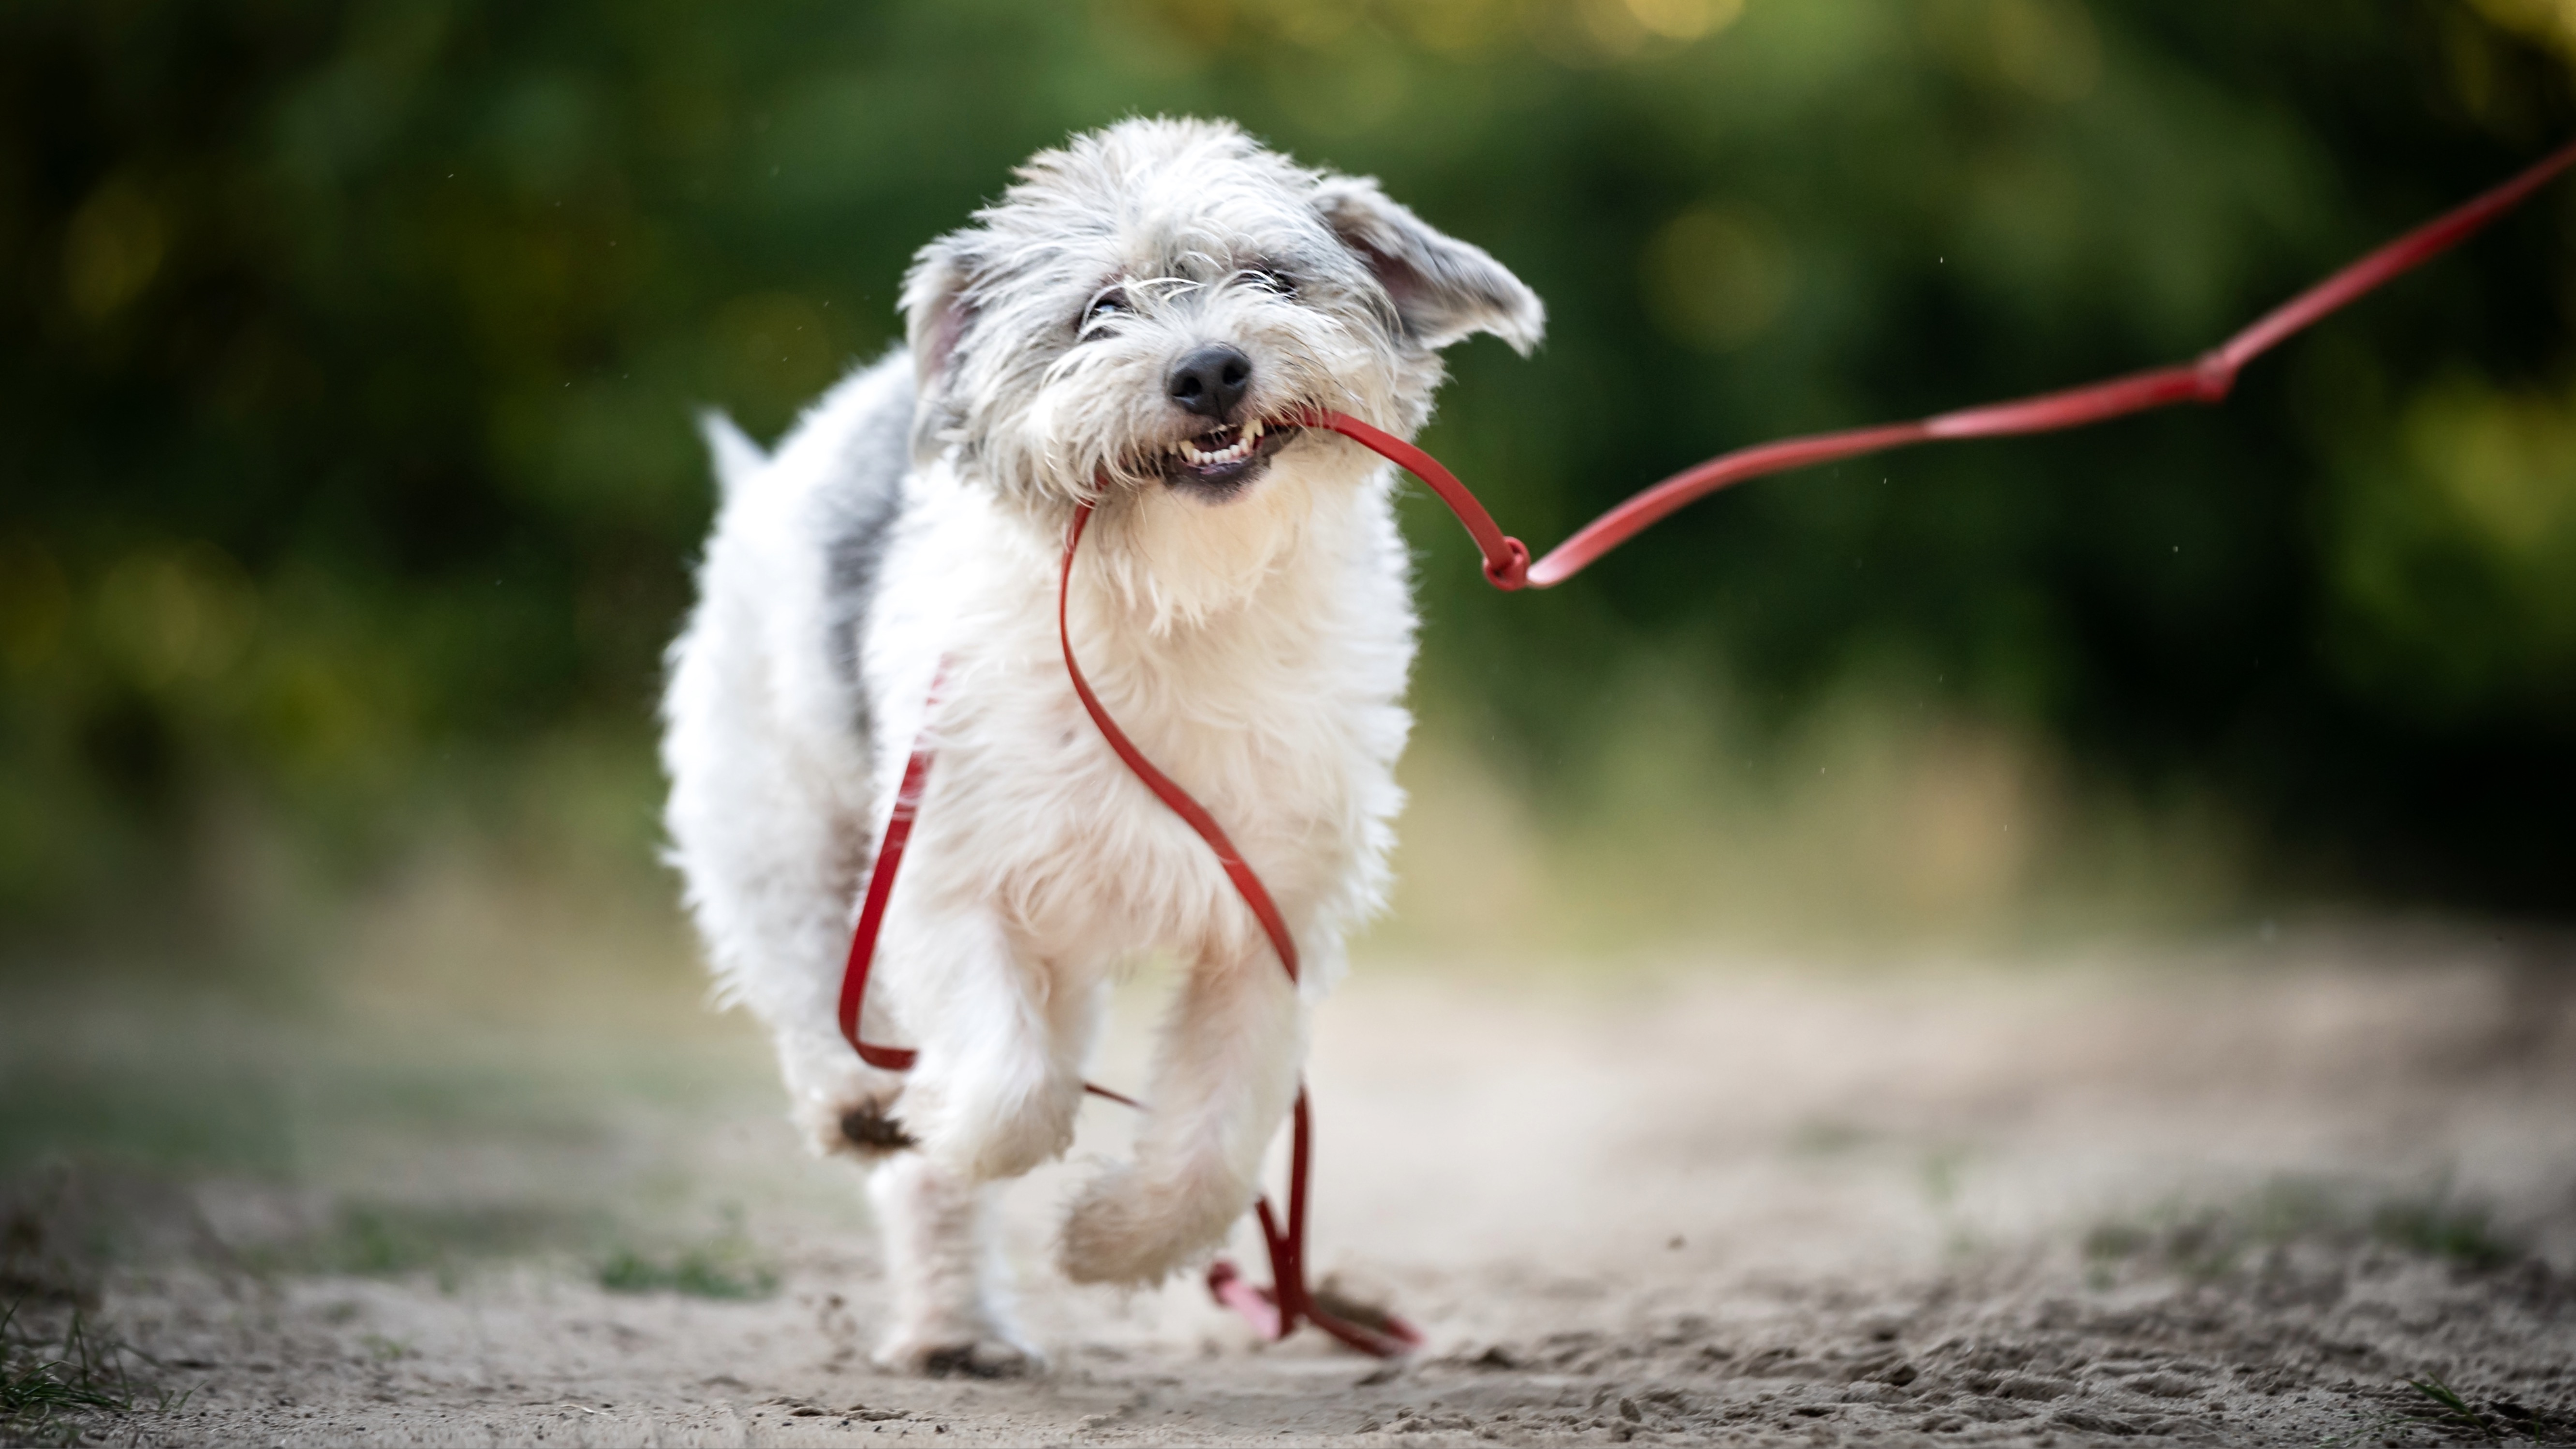 Trainer reveals how to get your dog walking well on a loose leash (and it's really straightforward)